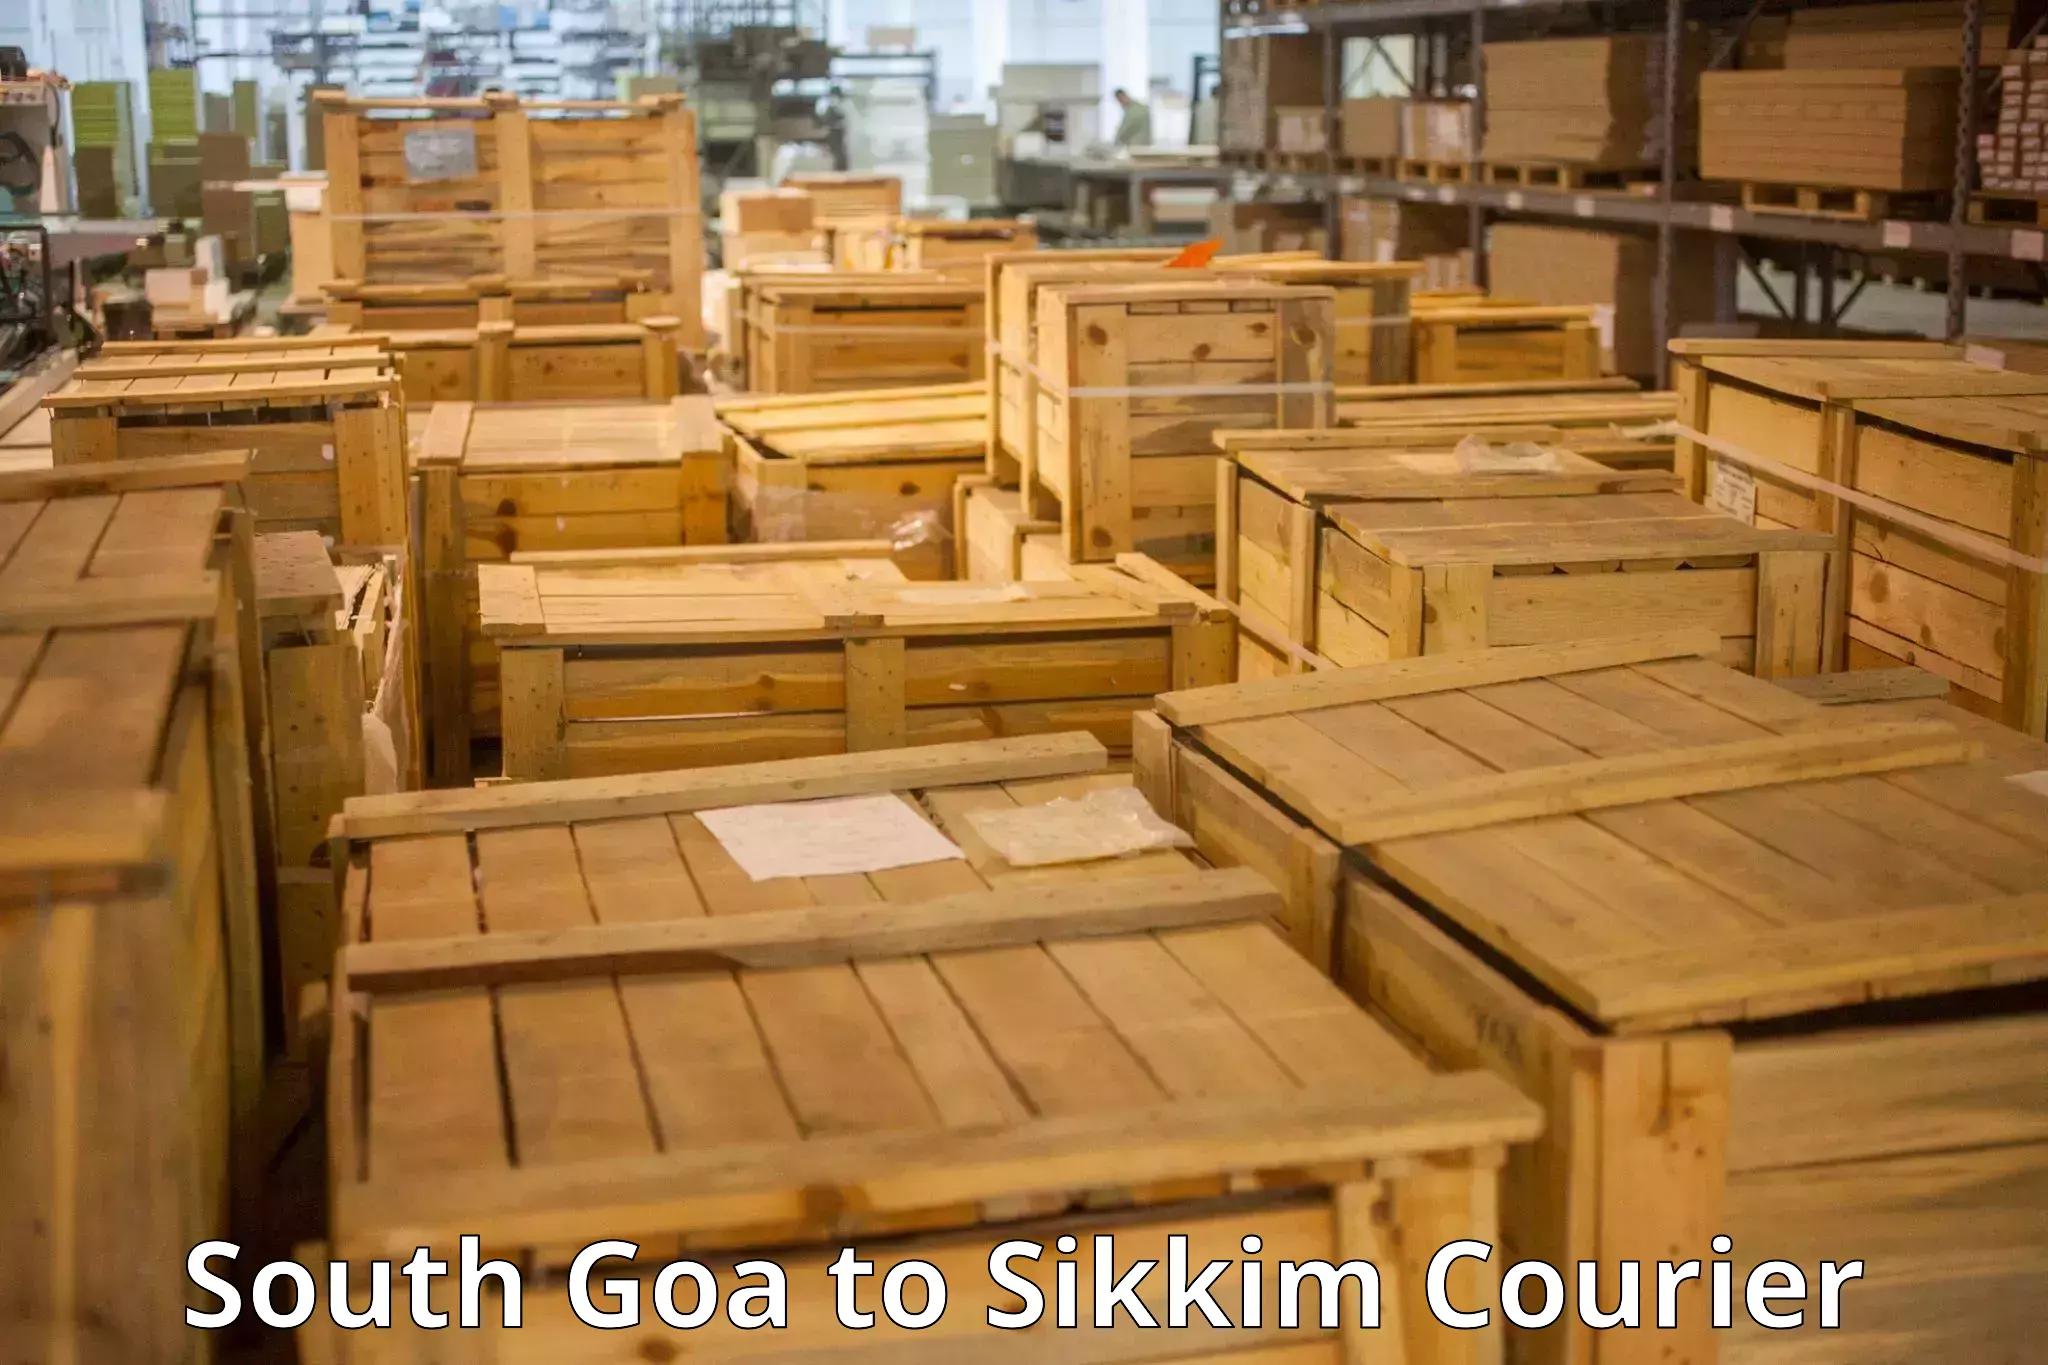 Baggage transport professionals South Goa to North Sikkim